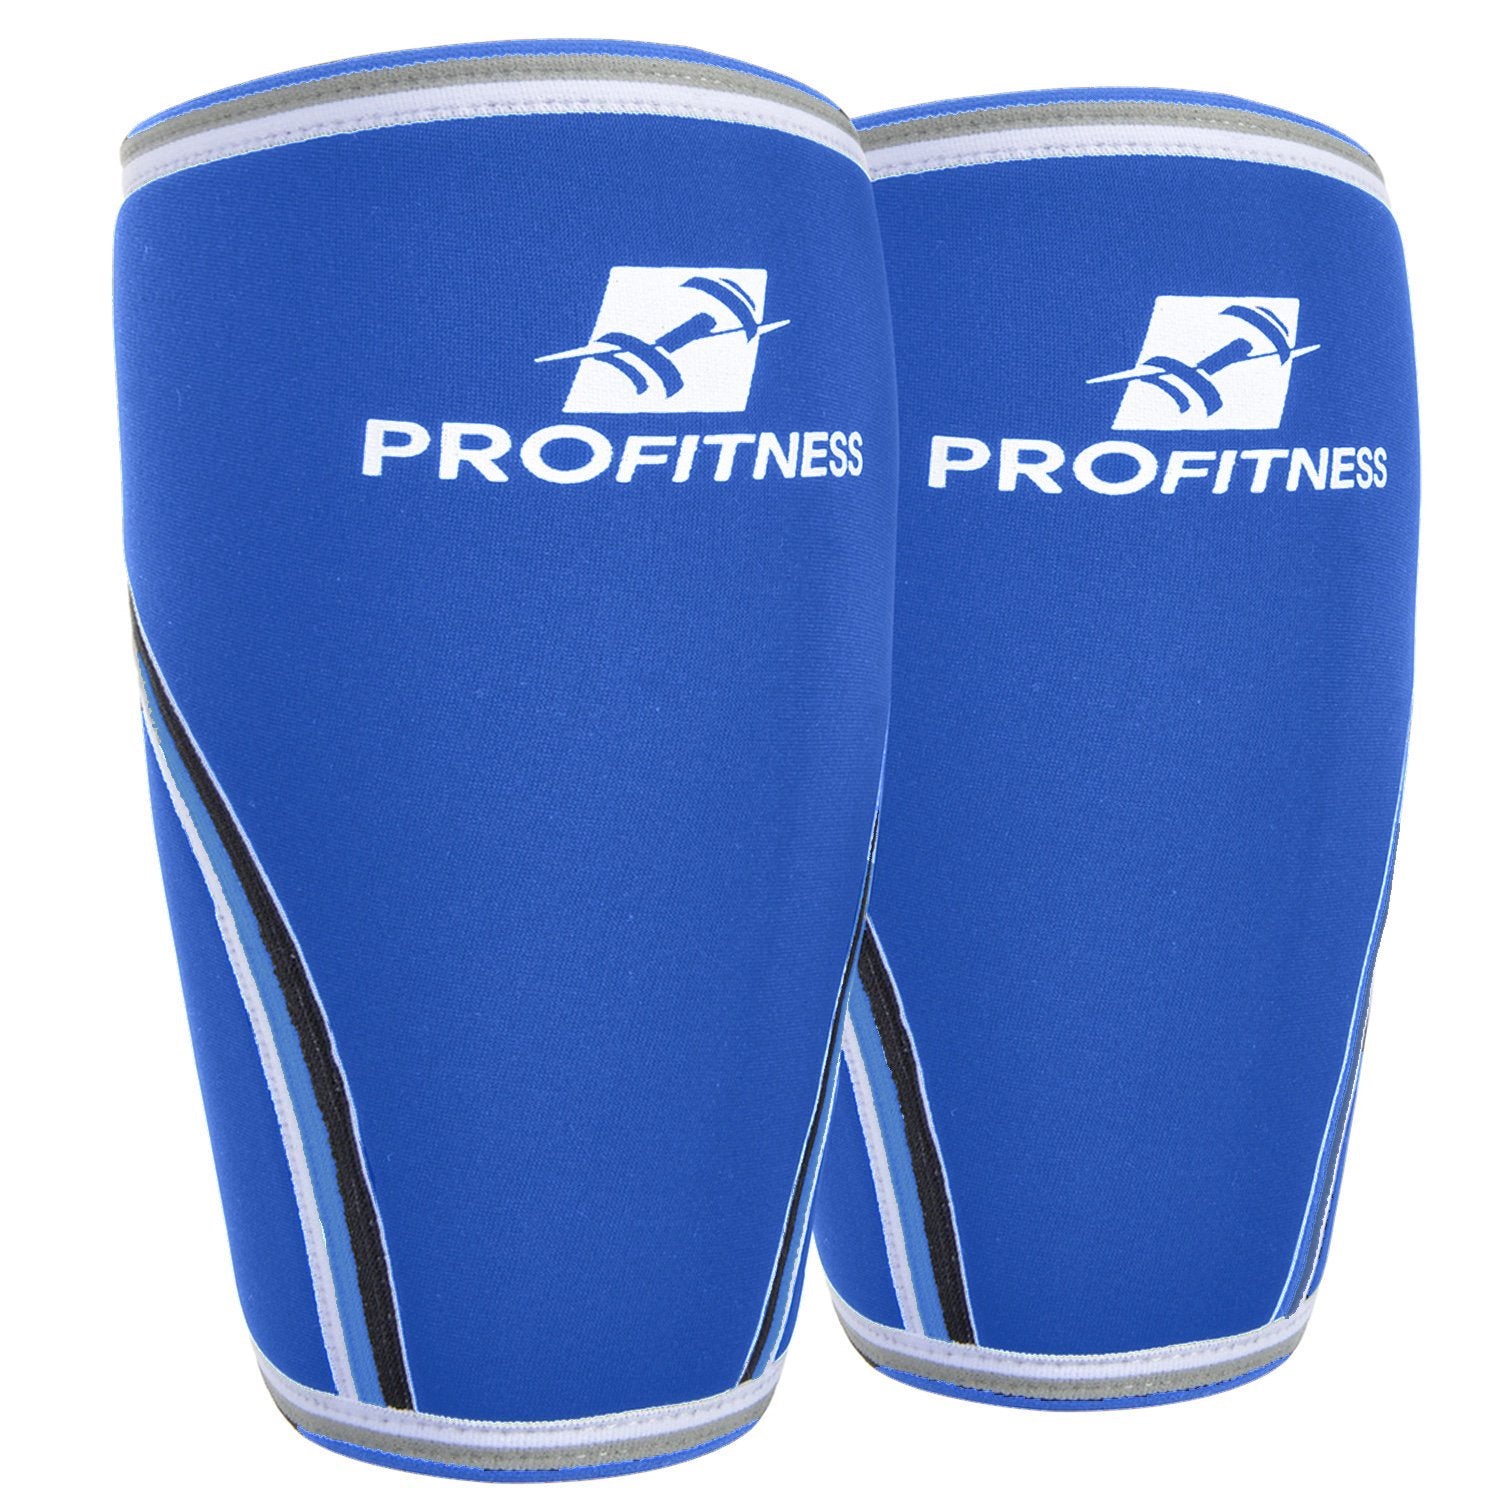 7mm Thick Weightlifting Knee Sleeves - TotalProFitness